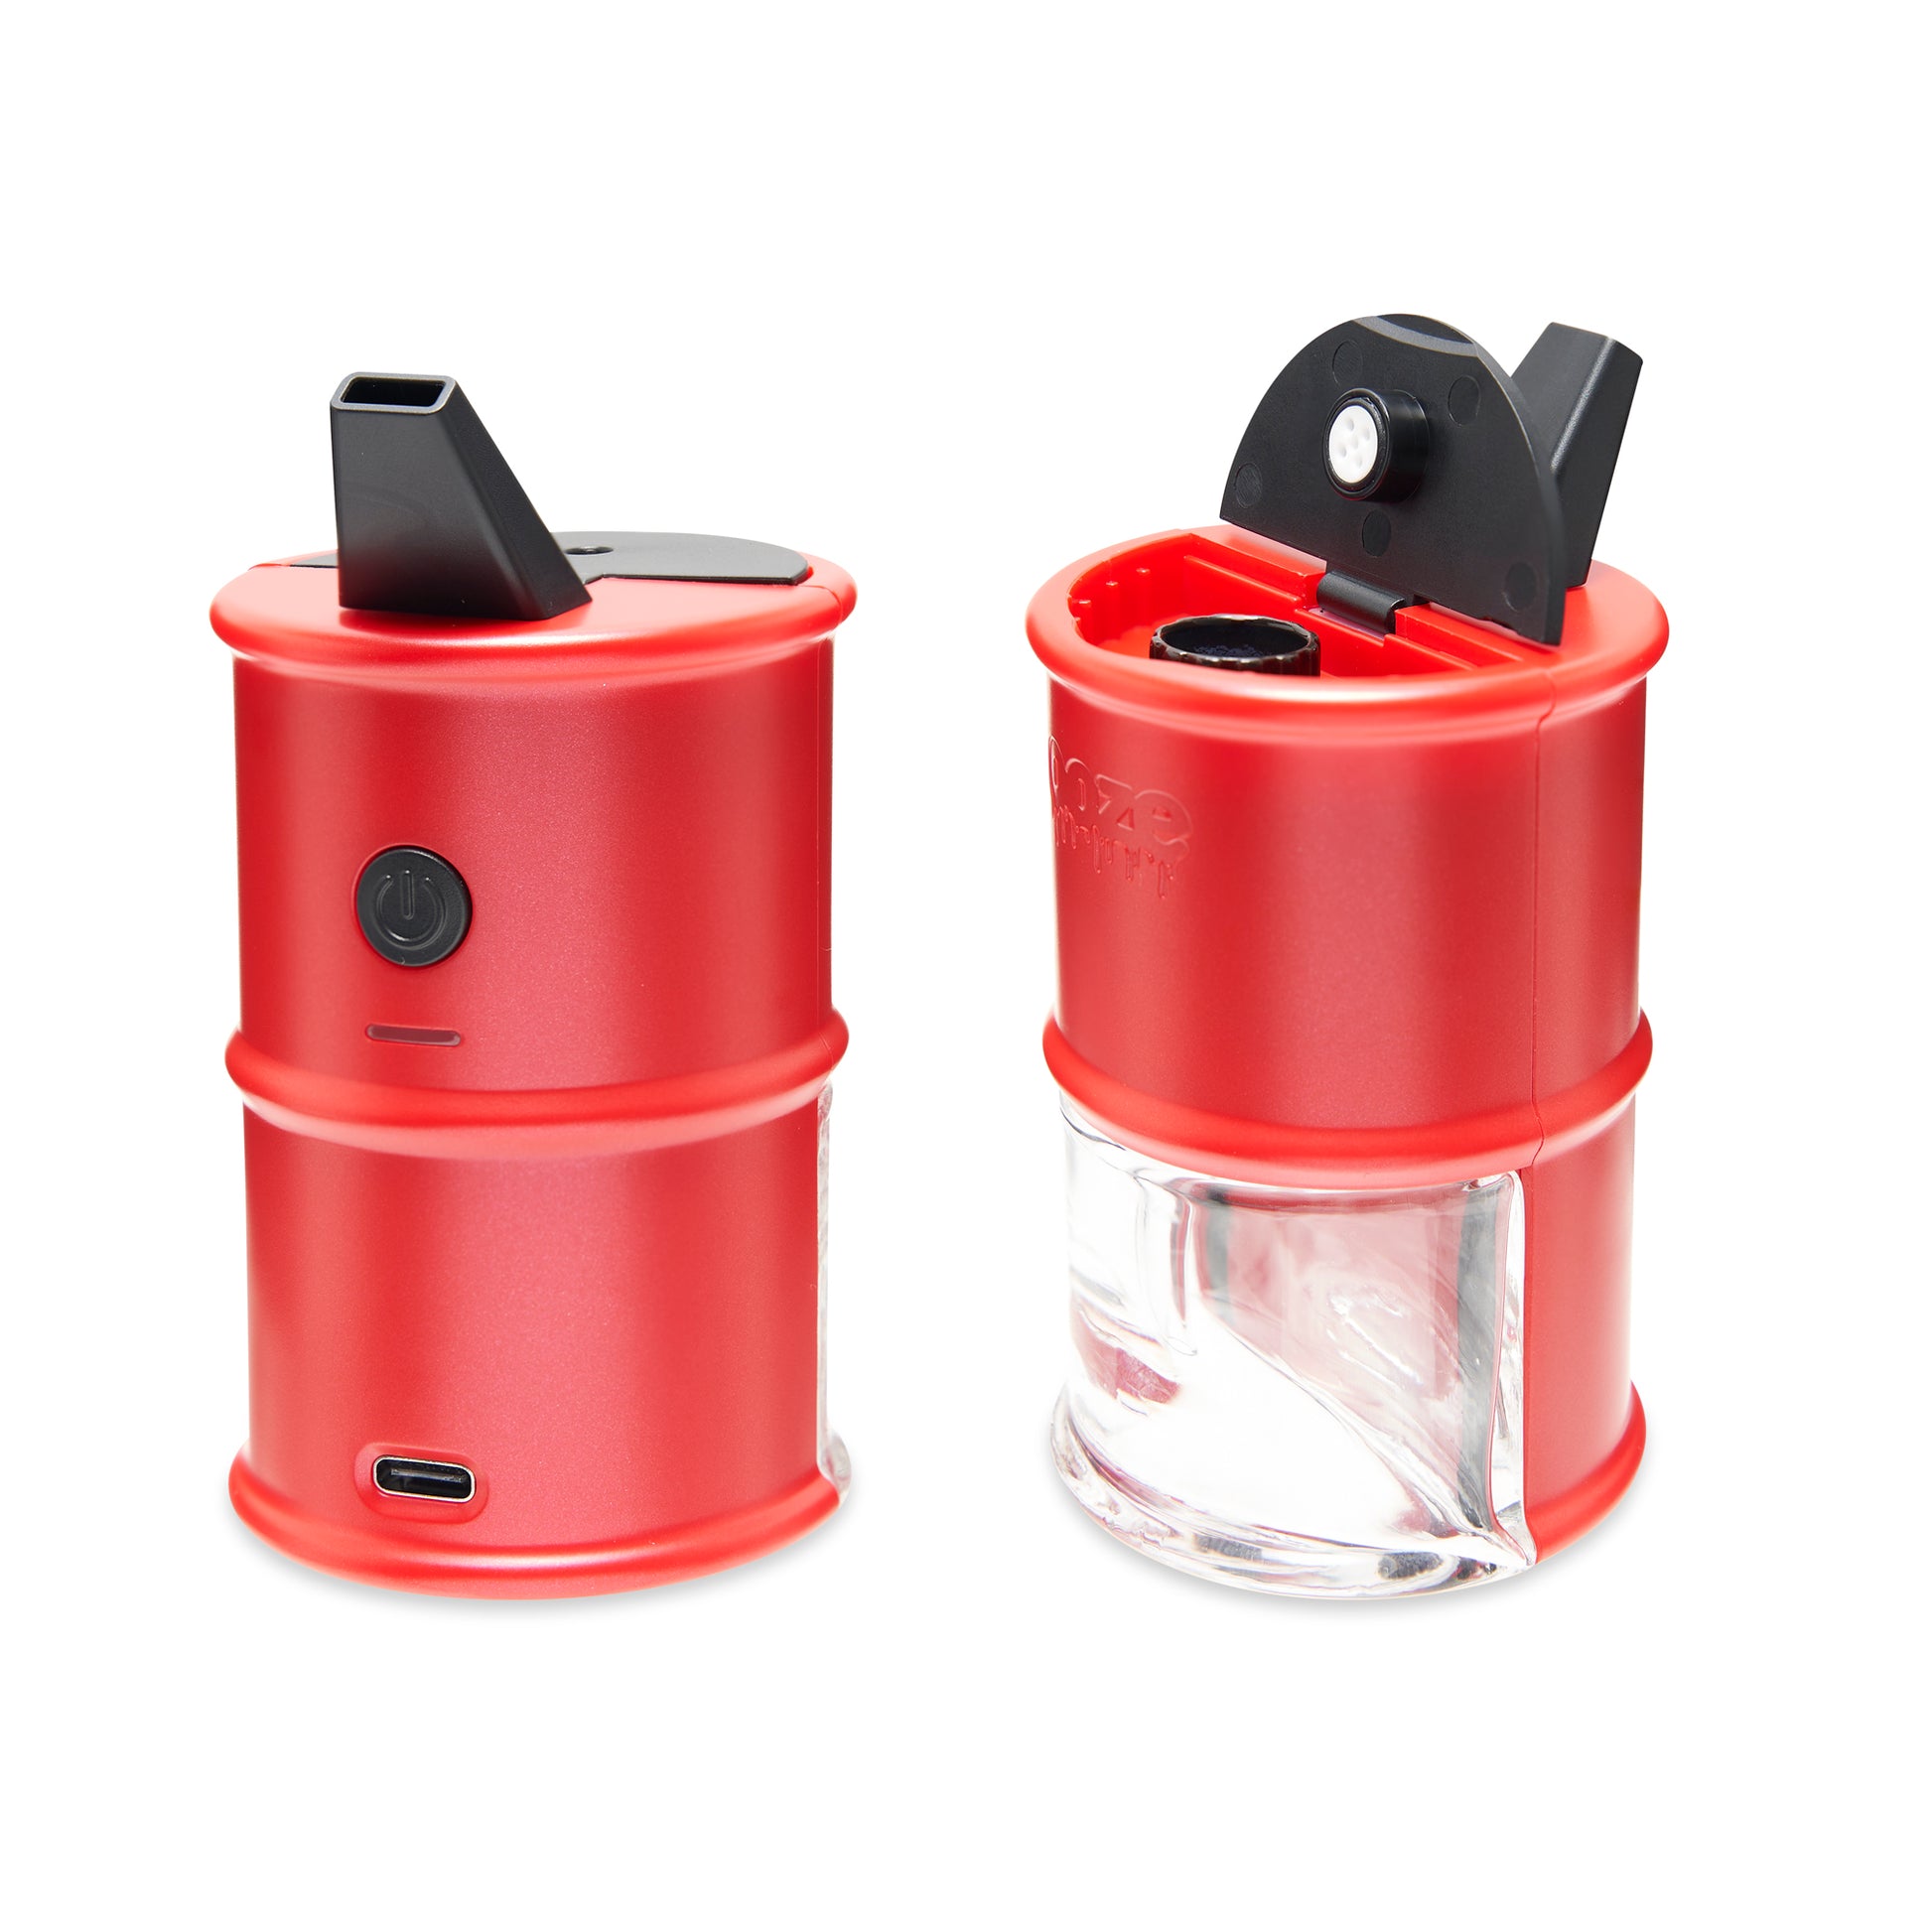 Two Ruby Red Ooze Electro Barrel E-Rigs are shown side by side. On the left it shows the back with the button, and on the right is the front of the device showing the water chamber with the lid open.